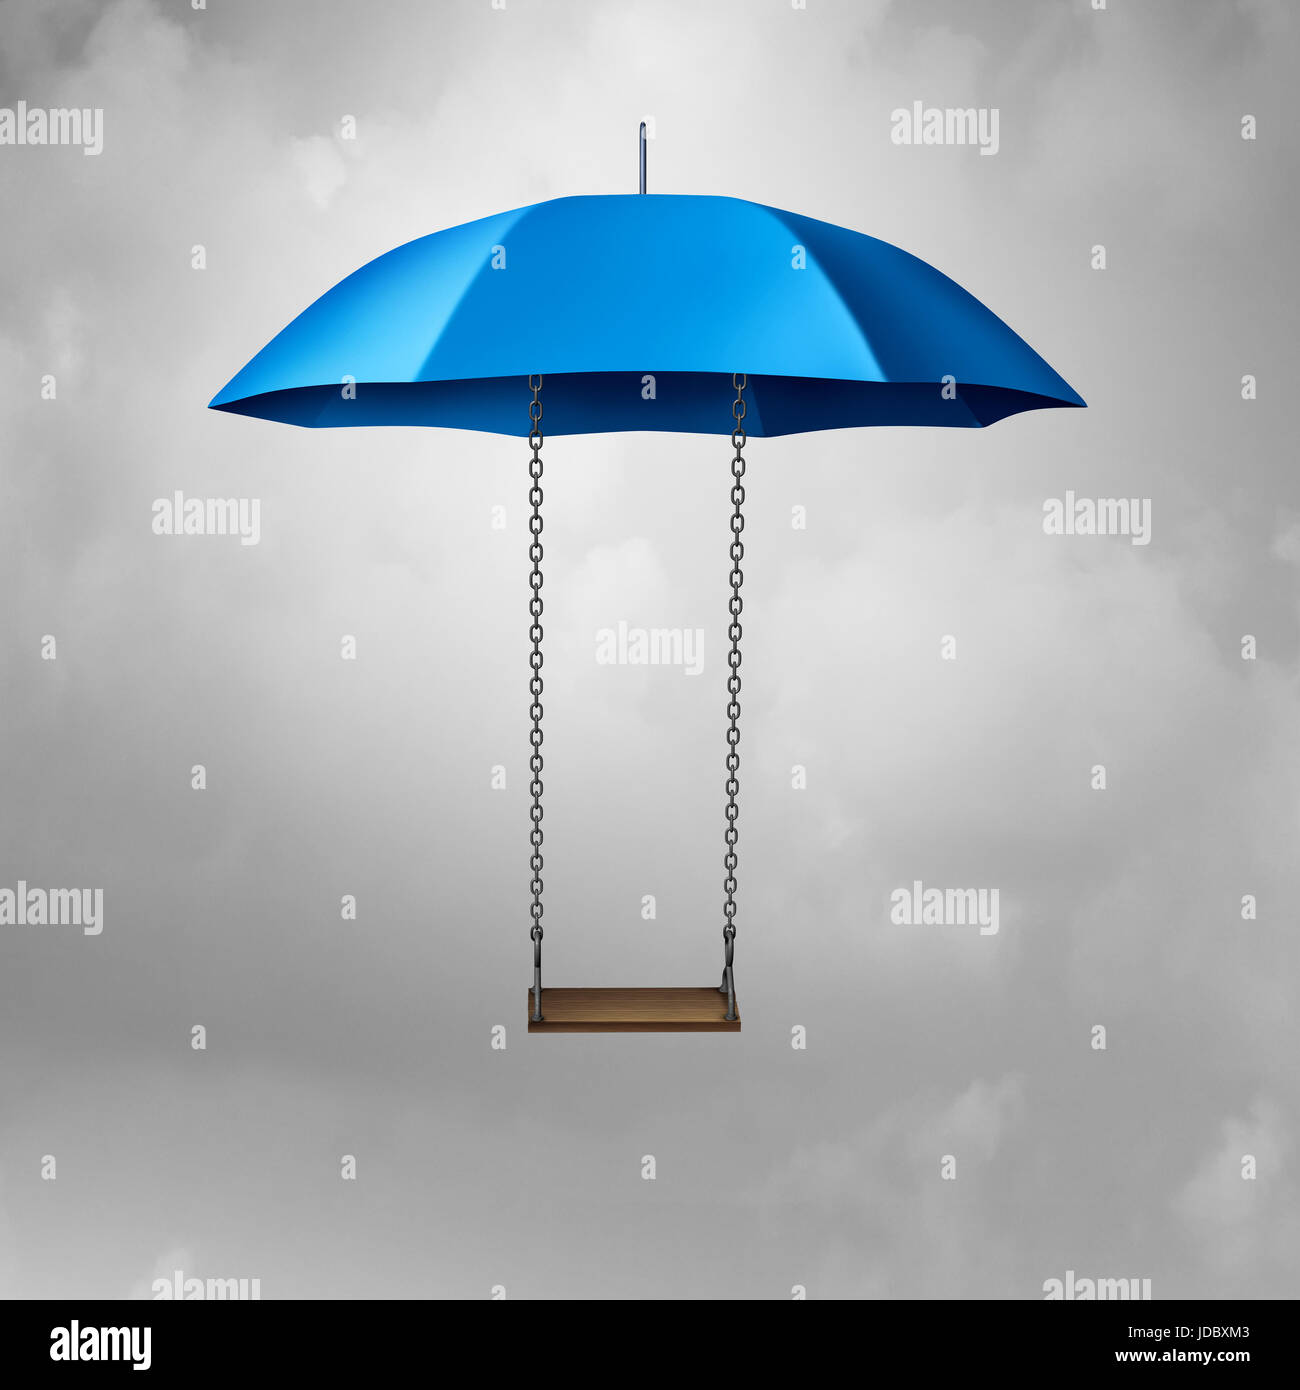 Childhood protection and child safety symbol as an umbrella with a swing protecting and providing safety and shelter to vulnerable youth. Stock Photo